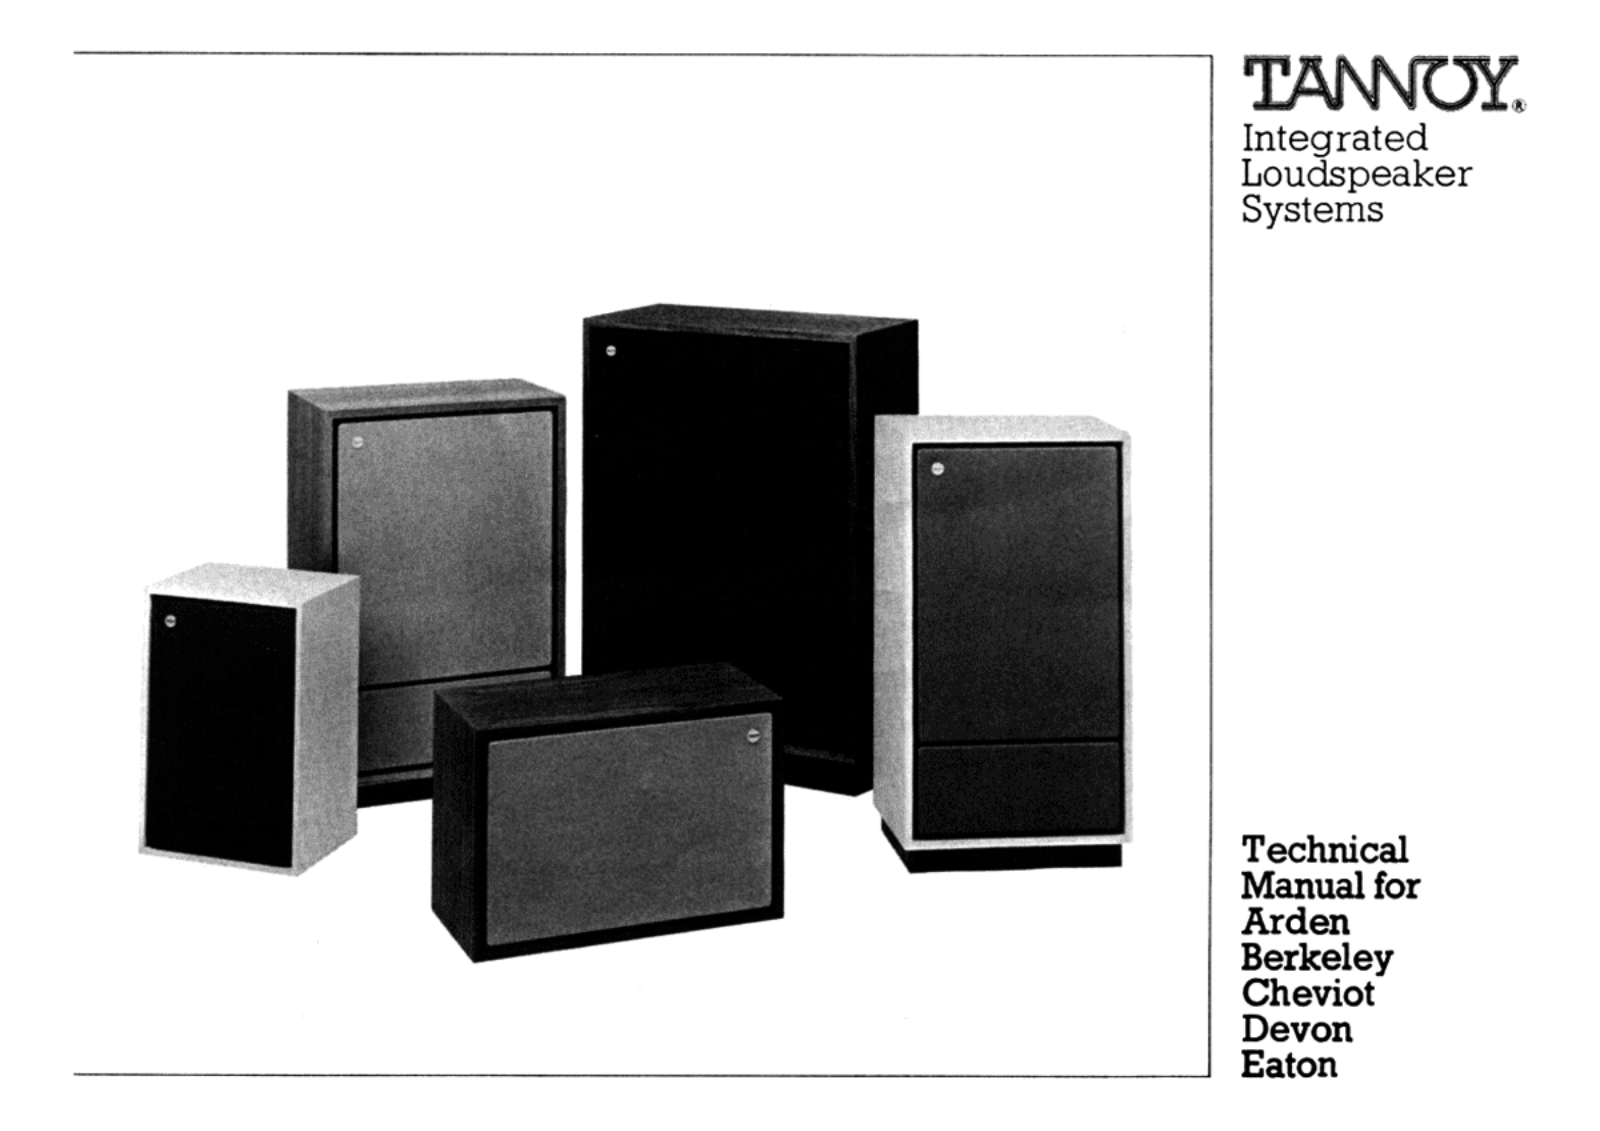 Tannoy Eaton Owners manual